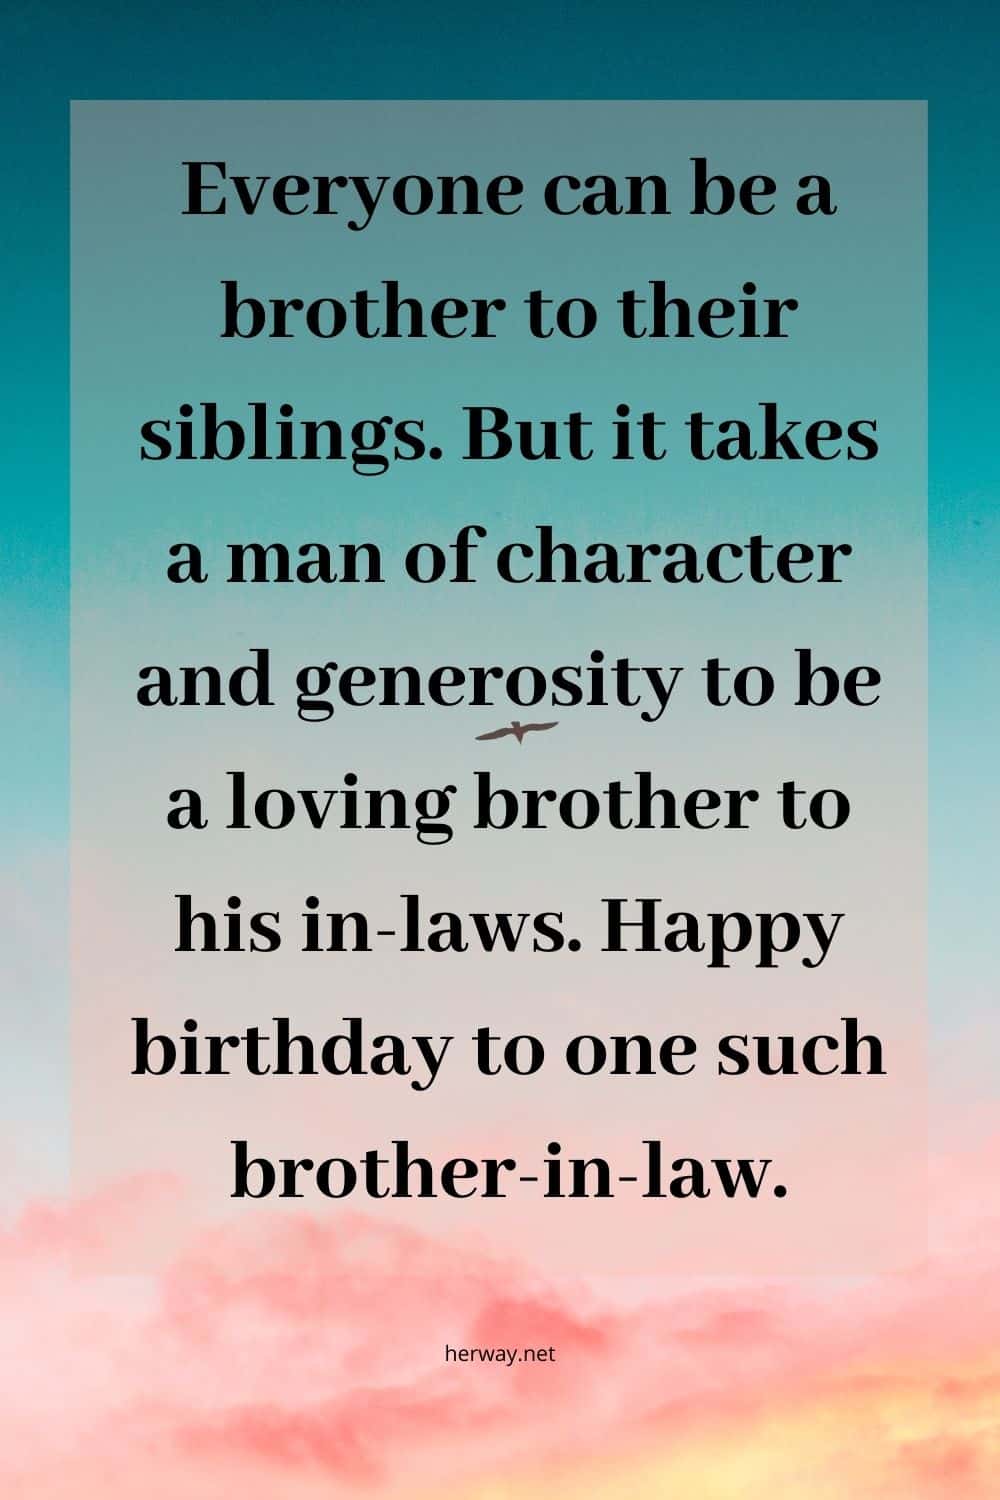 Birthday Wishes For Brother: 150+ Wishes For His Special Day